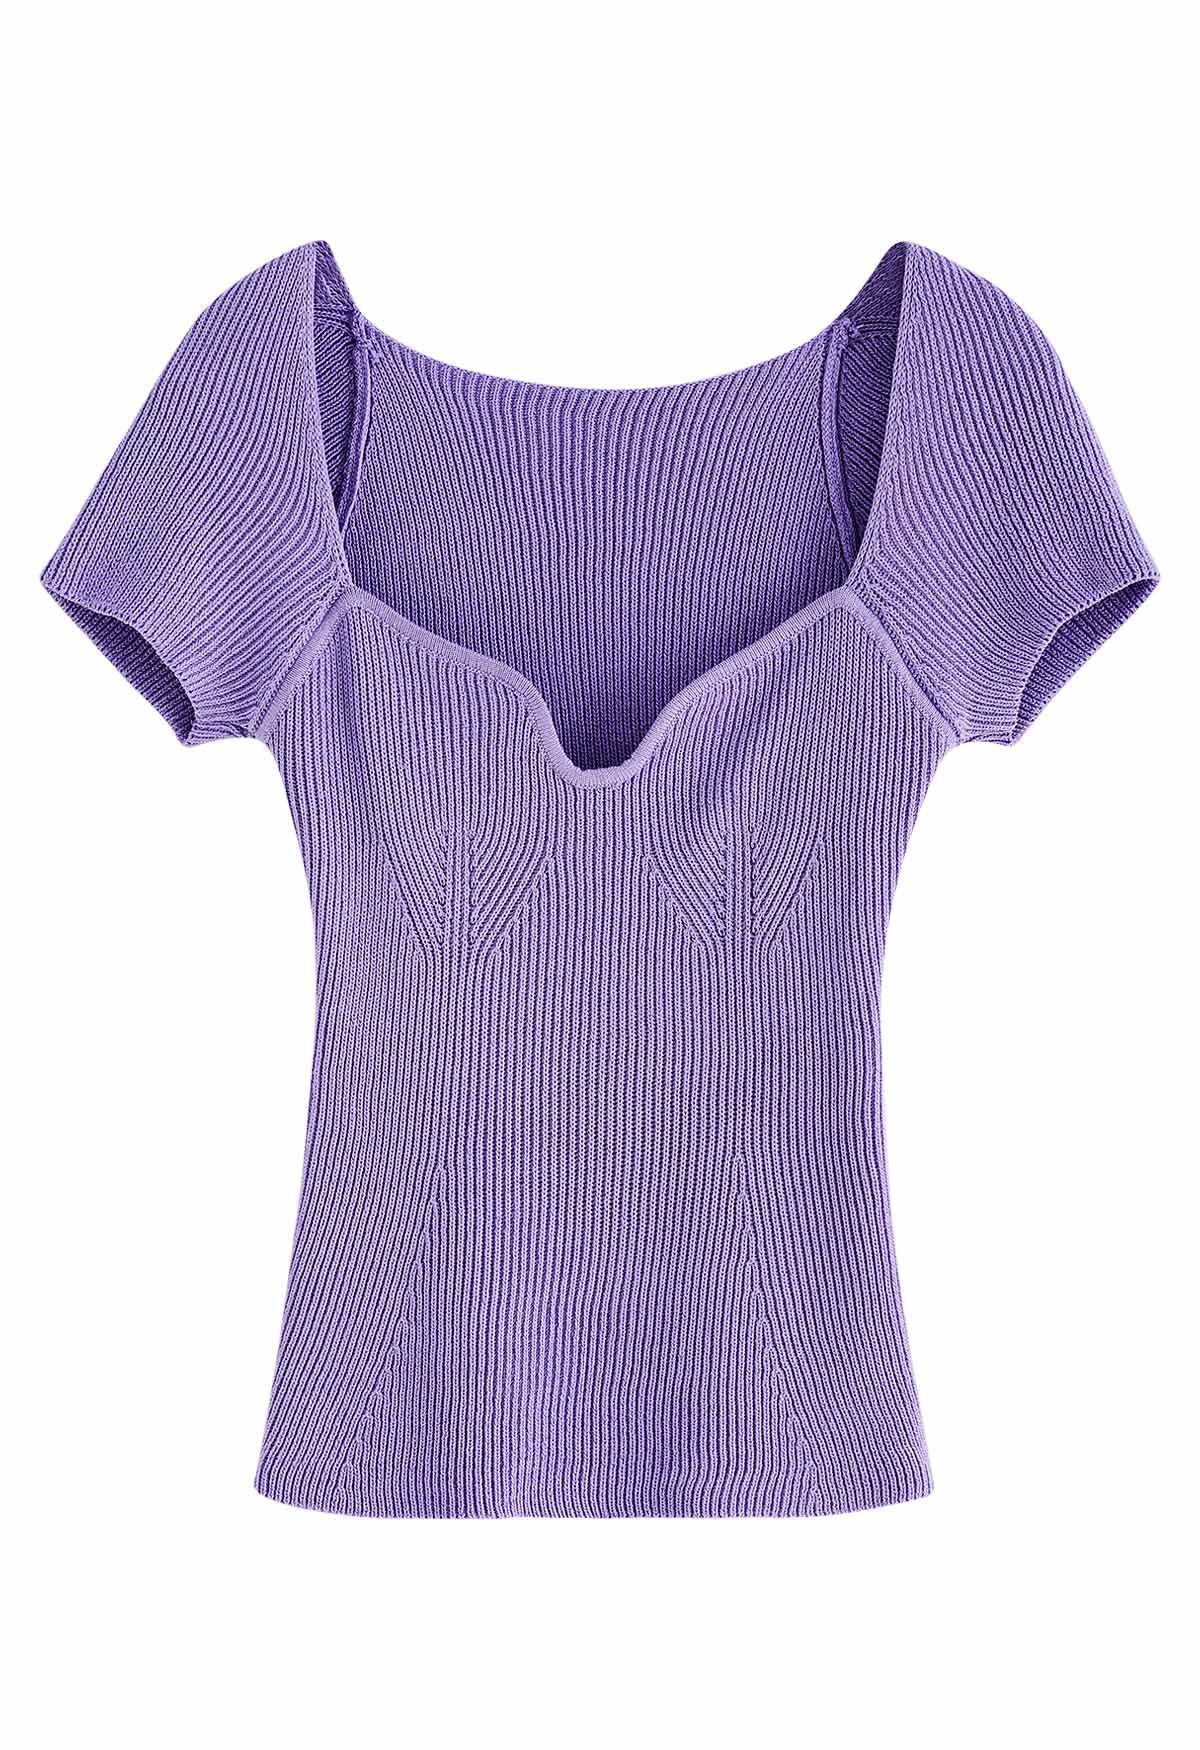 U-Shape Wide Collar Fitted Knit Top in Lilac